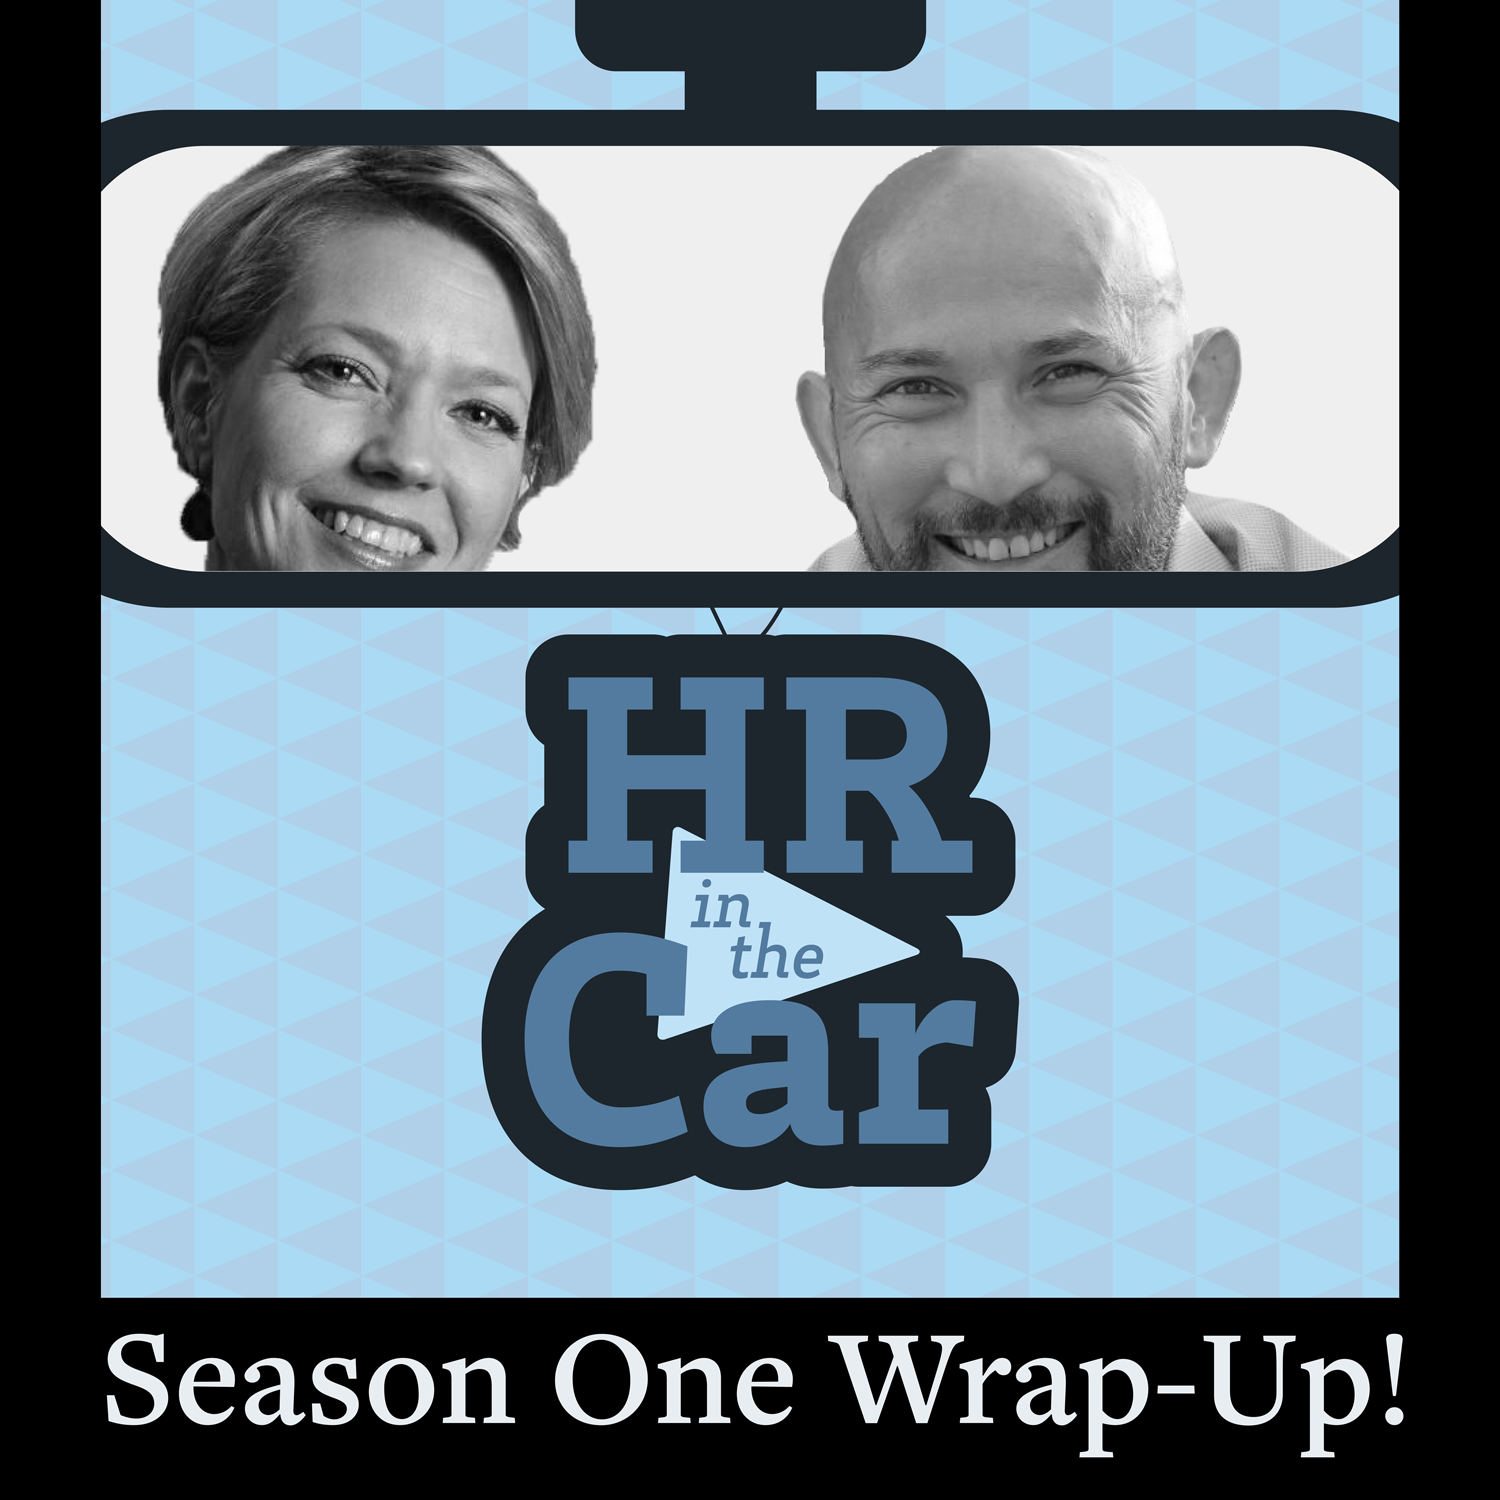 HR in the Car - Episode 27: "It's a Wrap!"